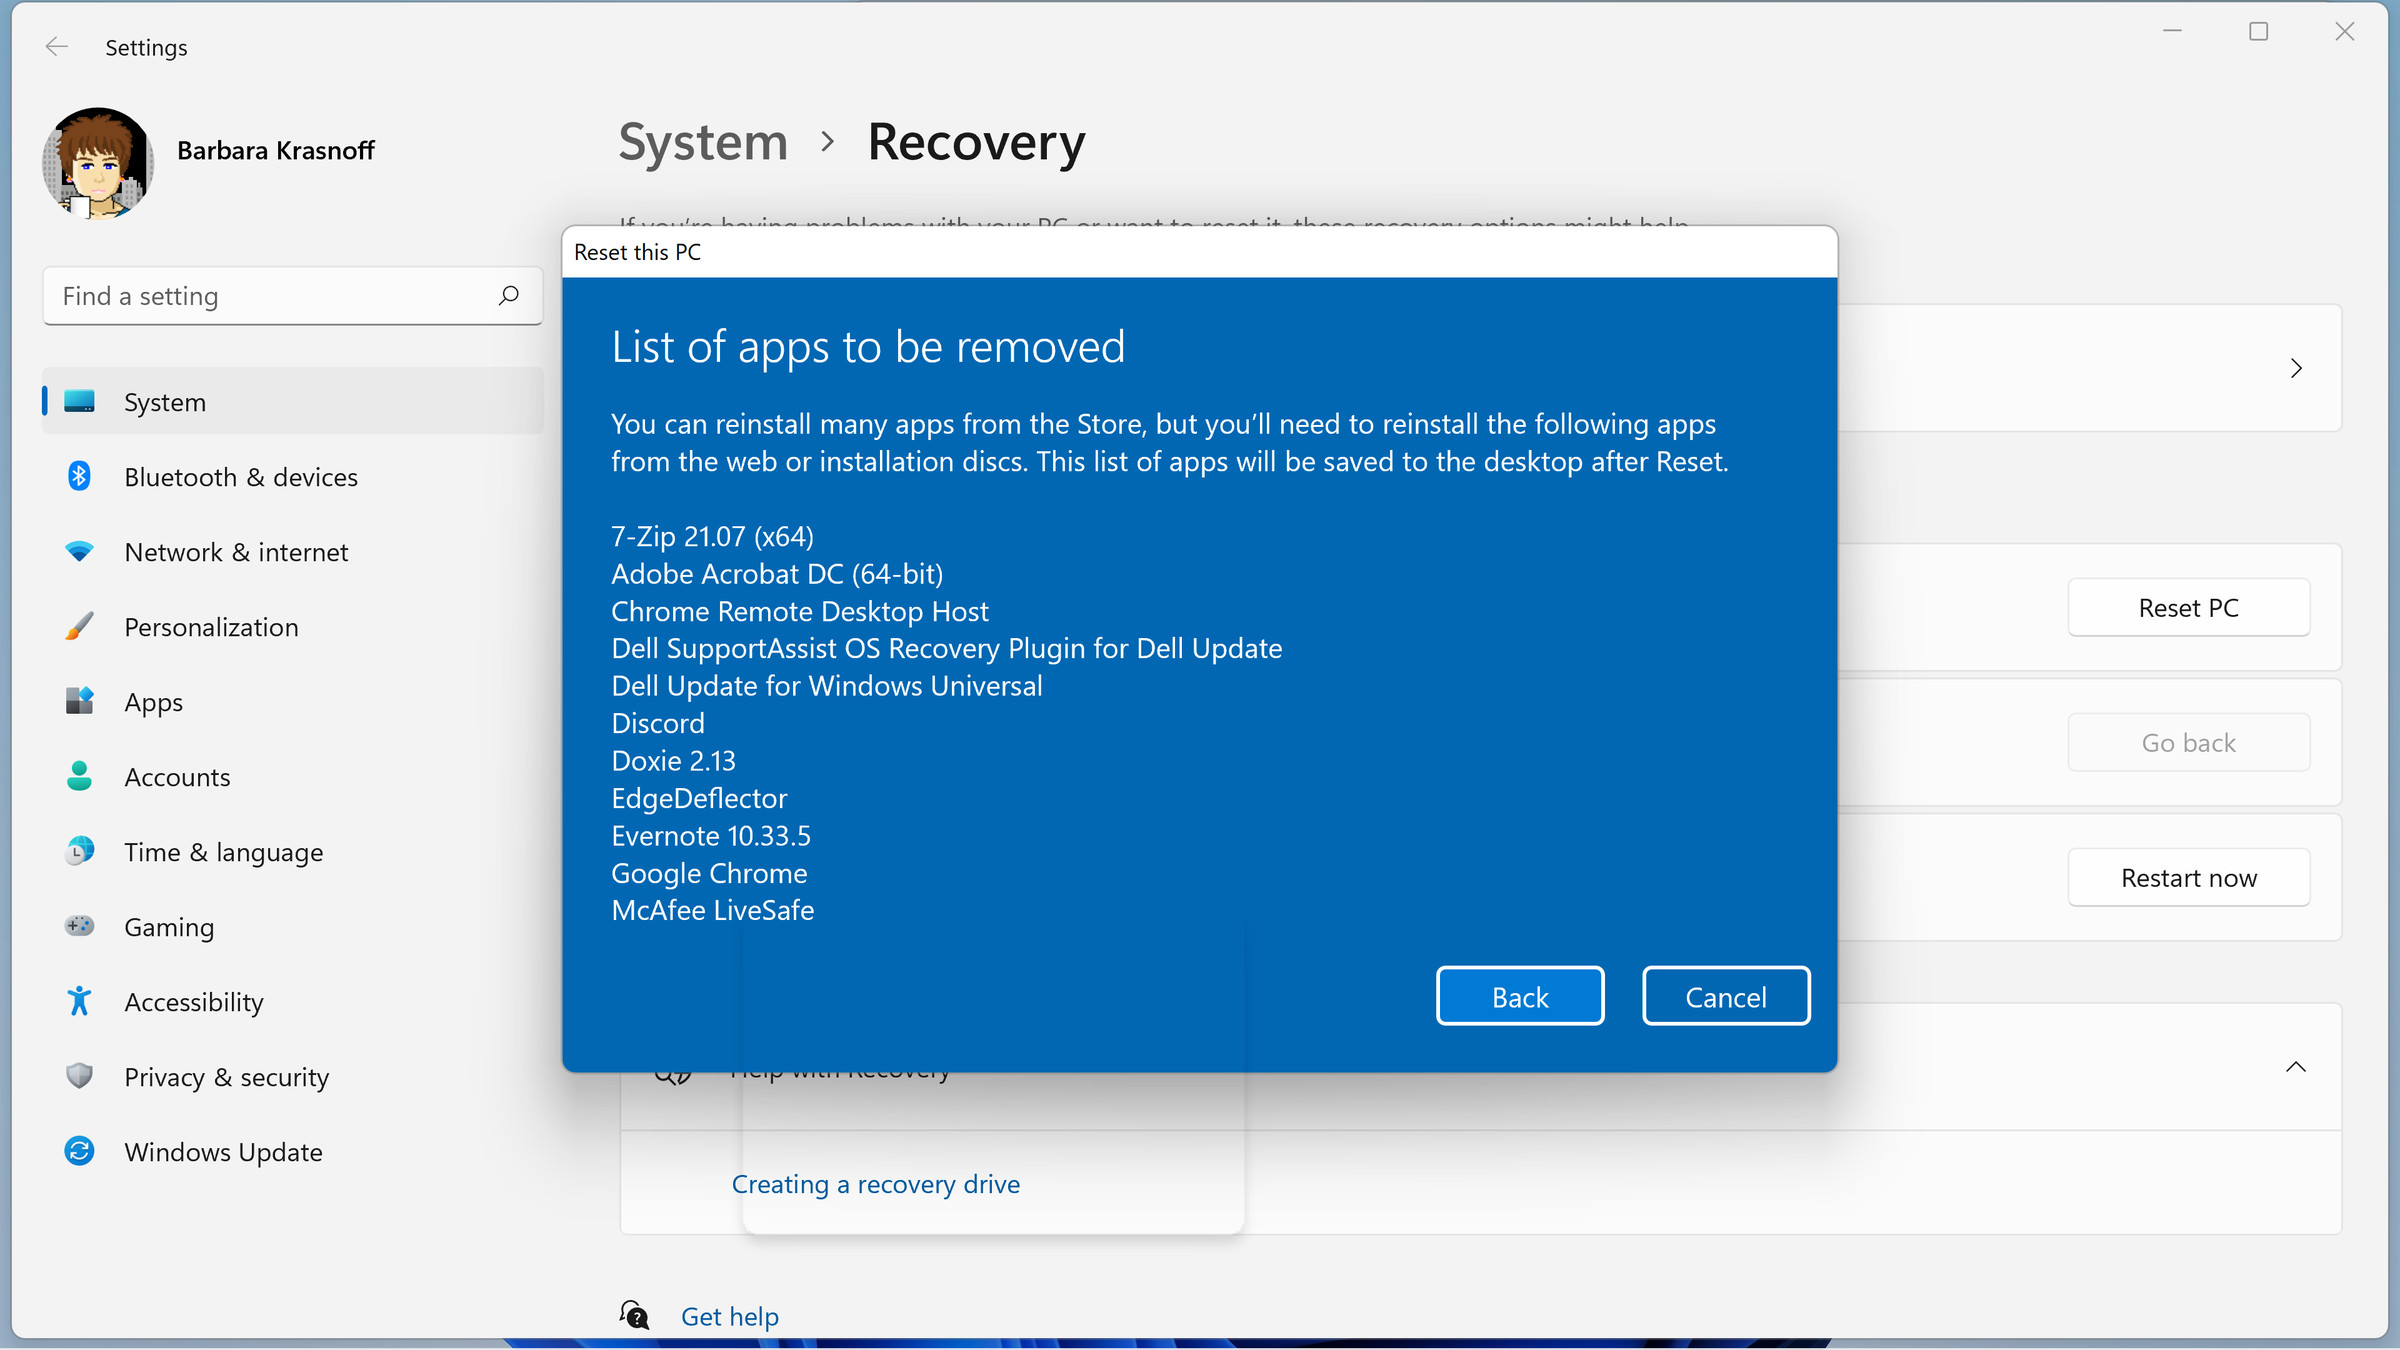 Some of your apps will have to be reinstalled after a reset.